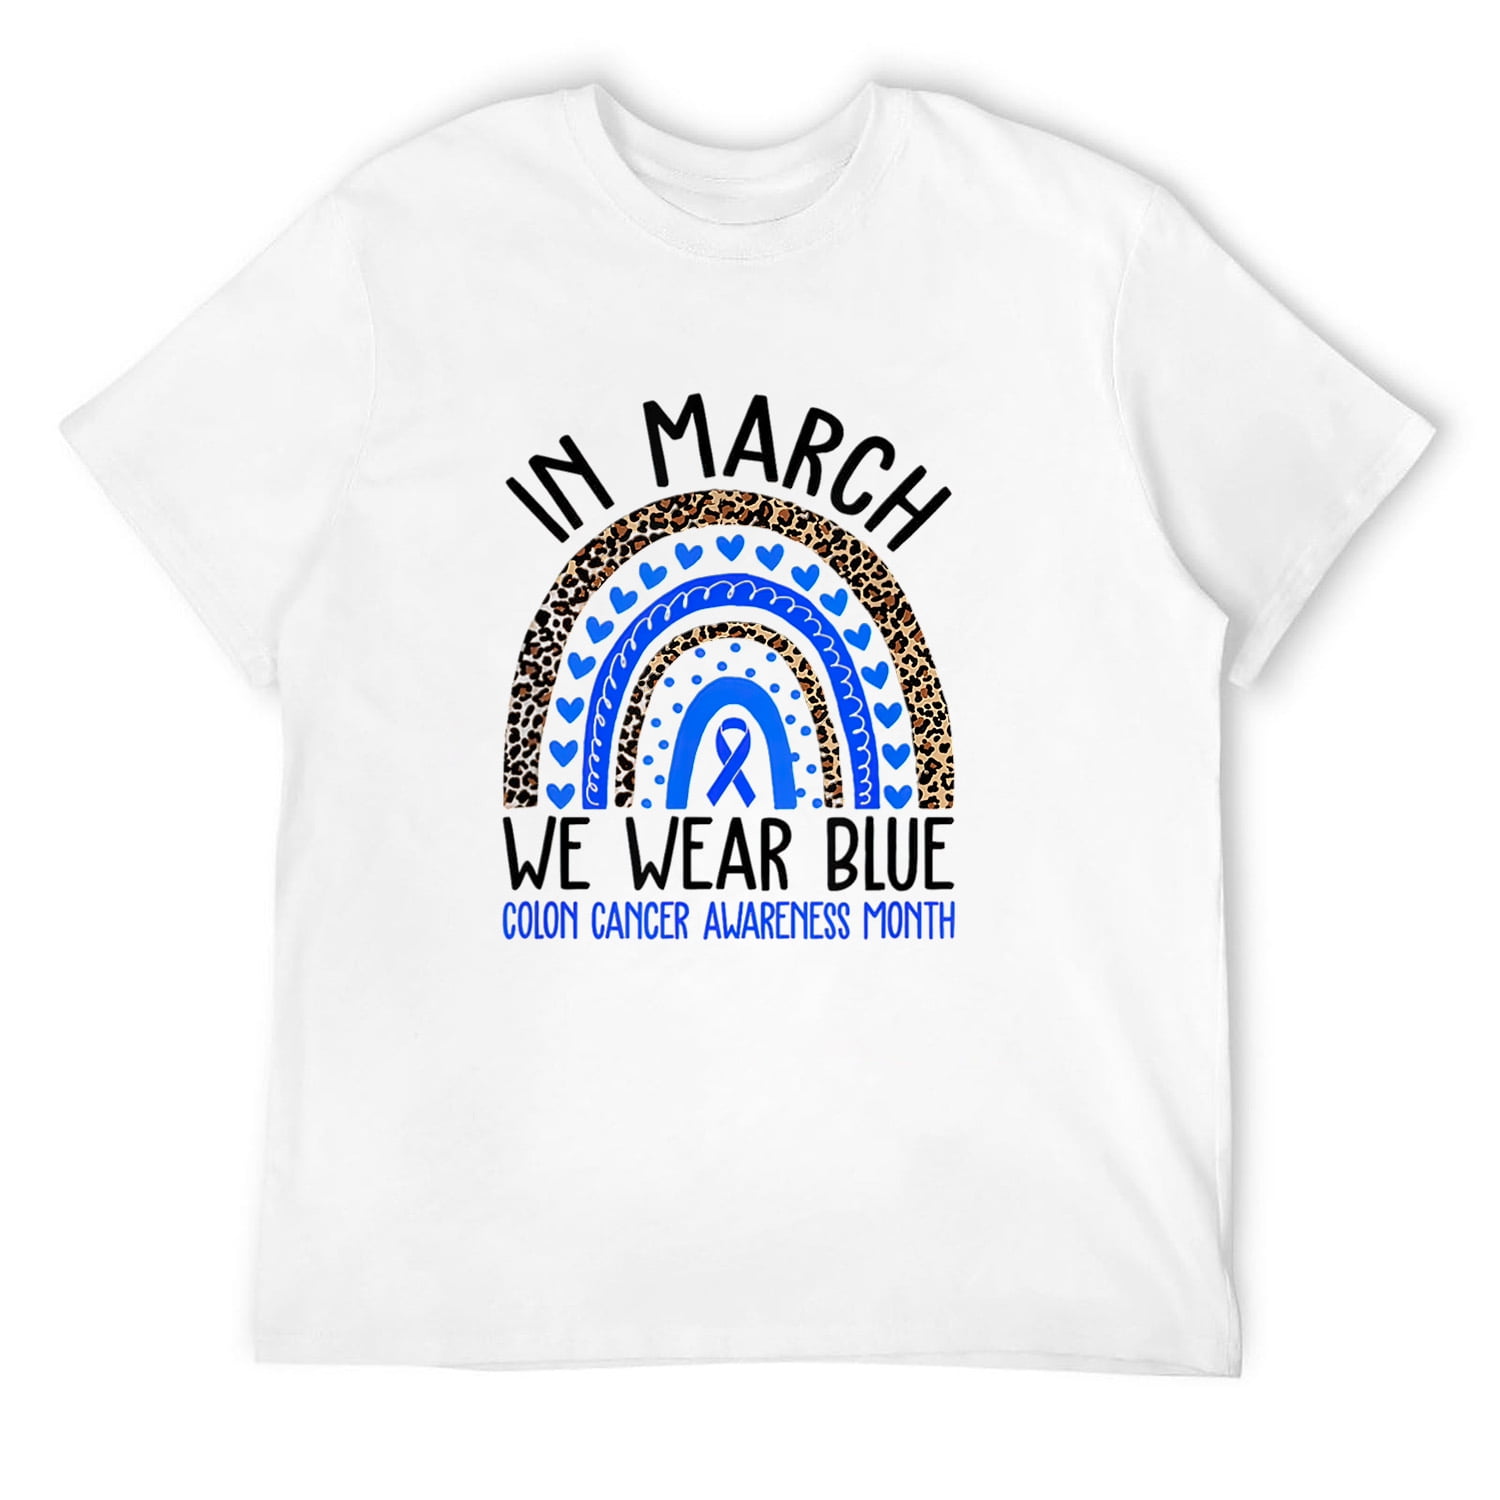 Mens In March We Wear Blue Colon Cancer Awareness Month T-Shirt White ...